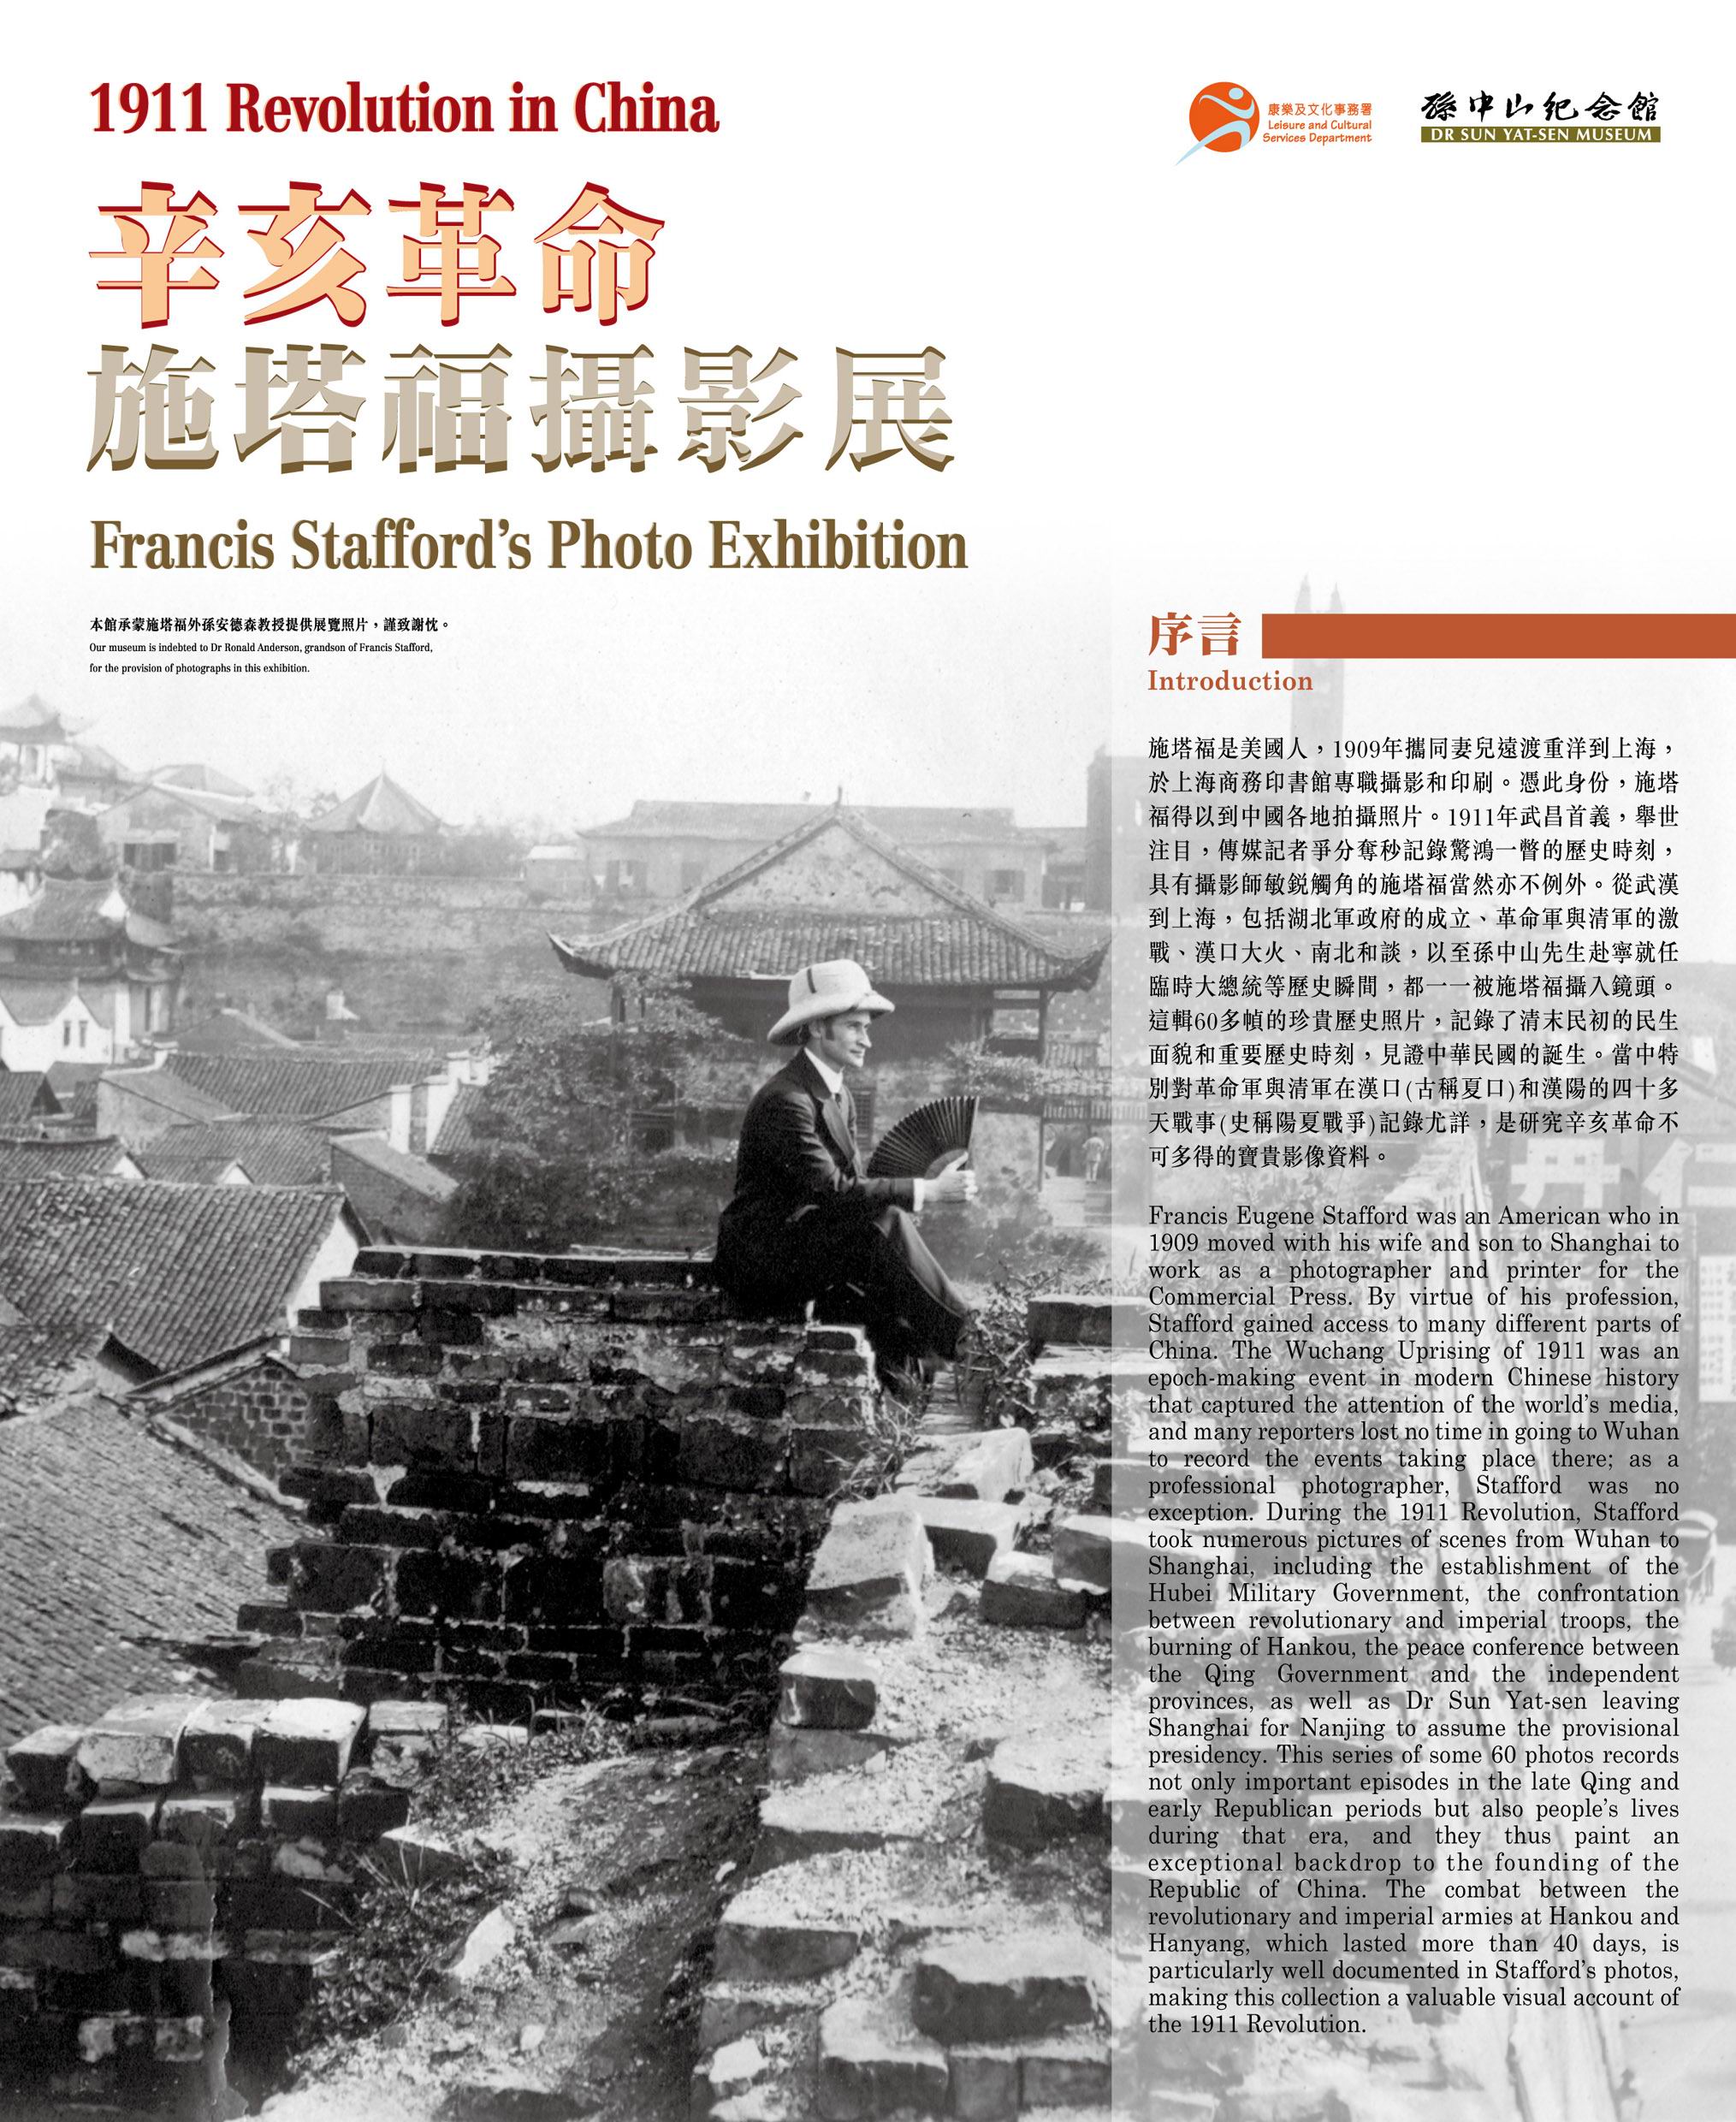 1911 Revolution in China: Francis Stafford's Photo Exhibition